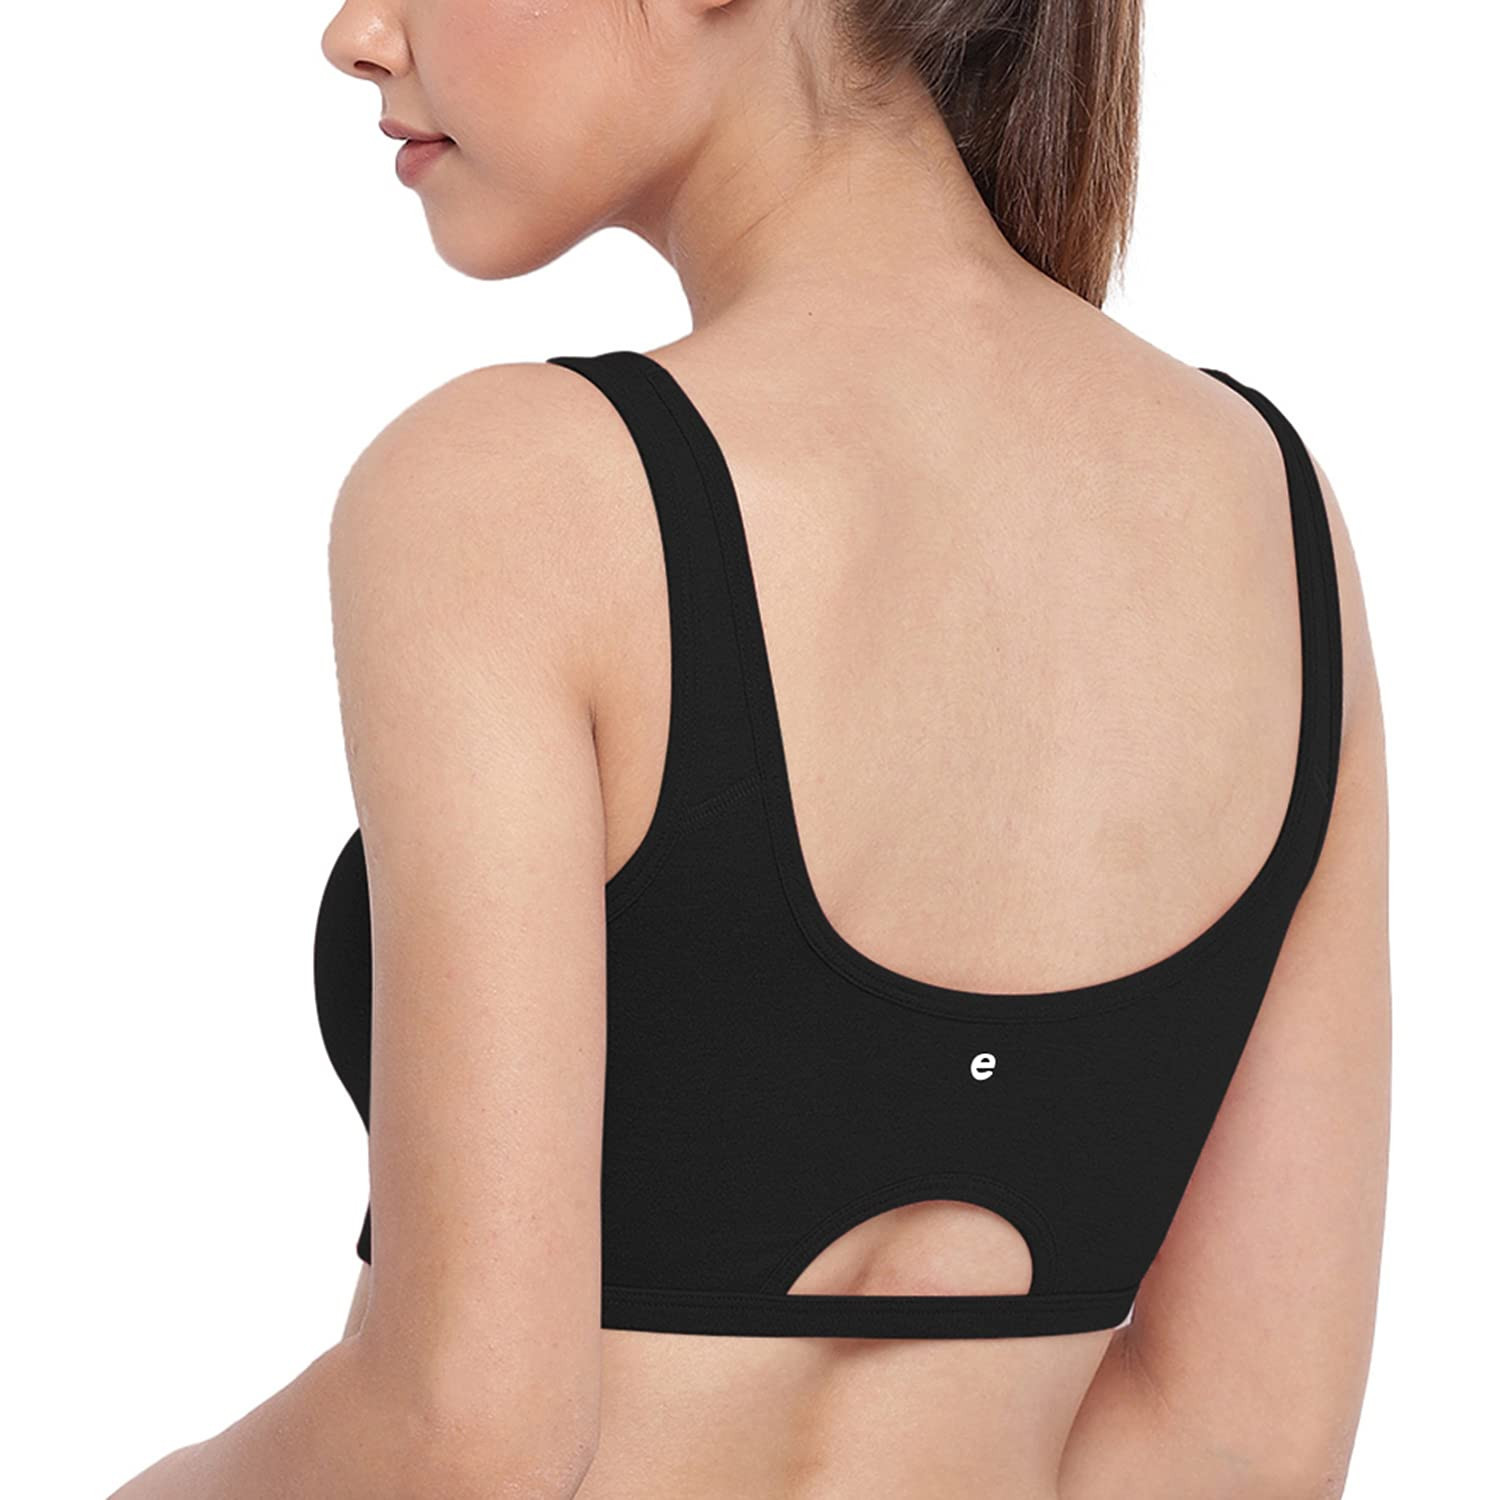 https://www.zebrs.com/uploads/zebrs/products/enamor-sb06-cotton-low-impact-slip-on-everyday-sports-bra-for-women---non-padded-non-wired-amp-high-coverage--available-in-solids-amp-printssb06-blackblack-l-22015363232945_l.jpg